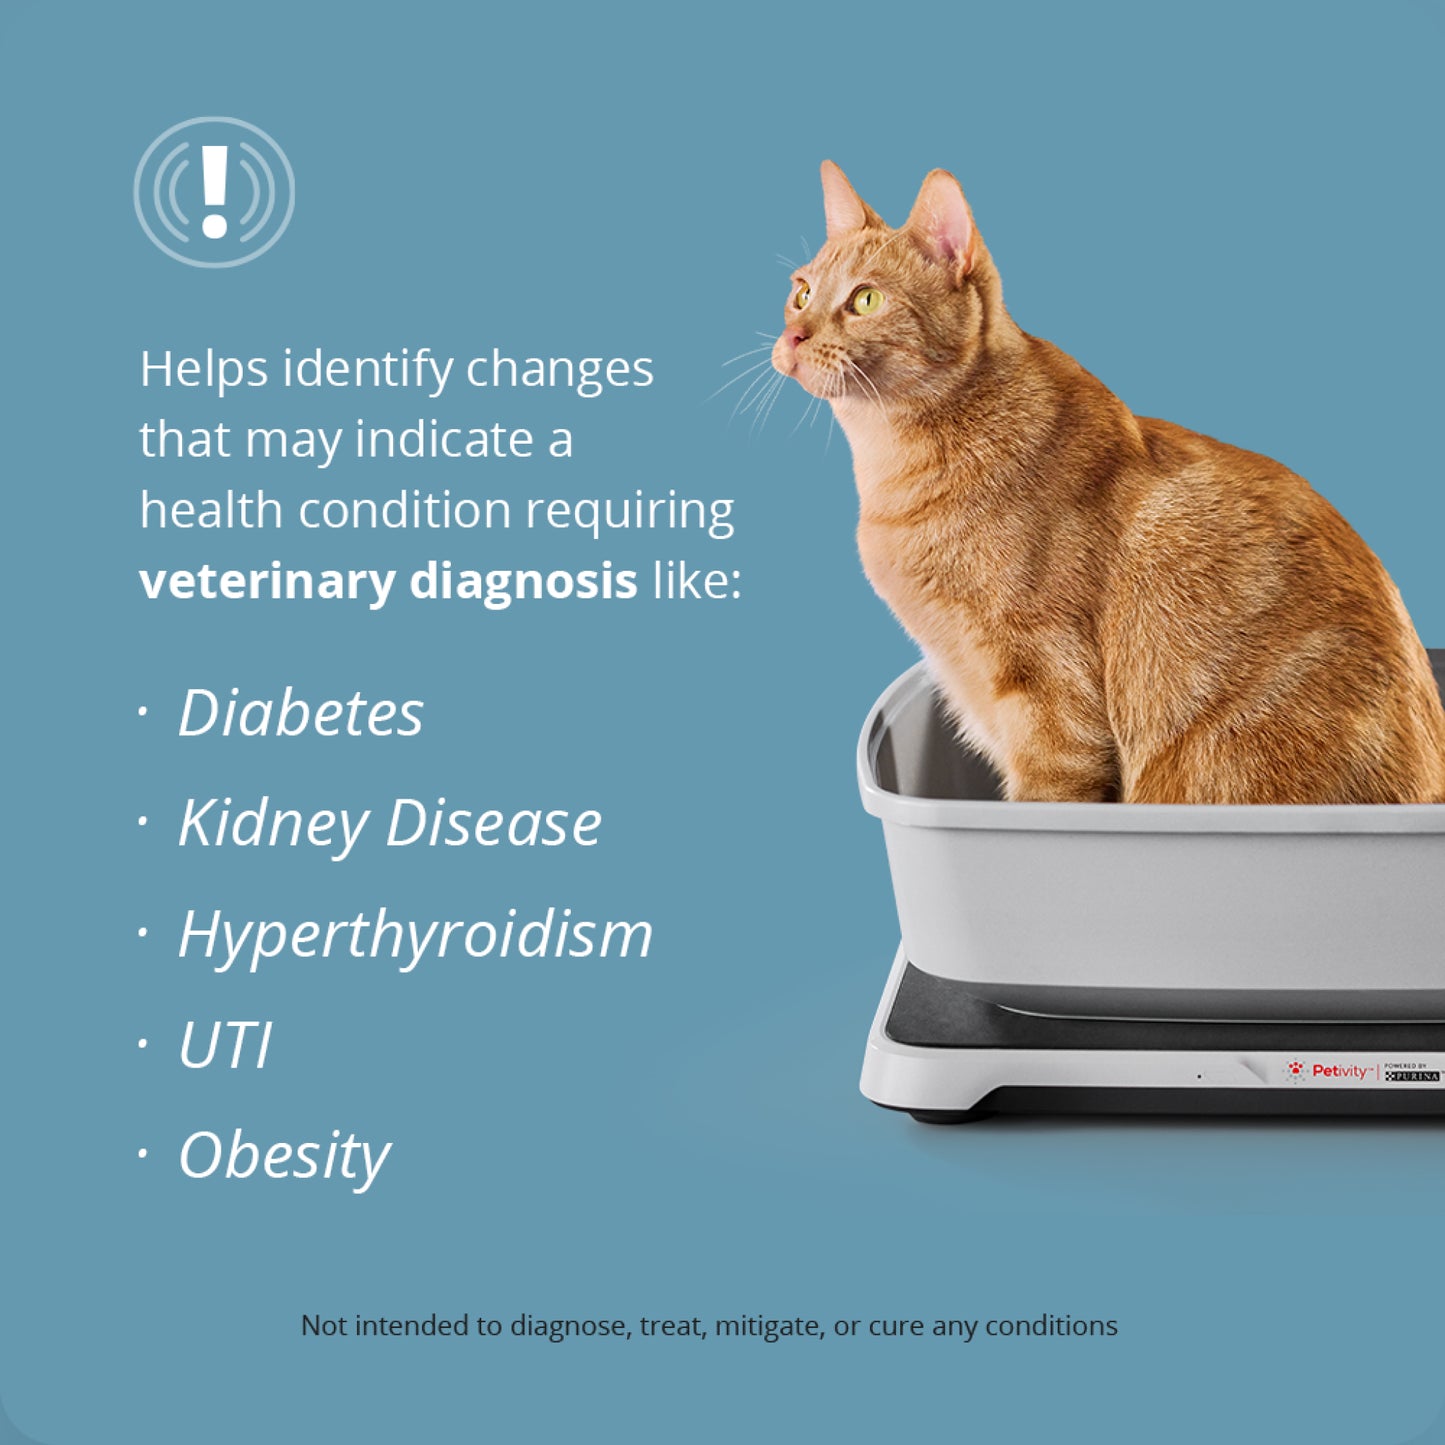 Helps identify changes that may indicate a health condition requiring veterinary diagnosis